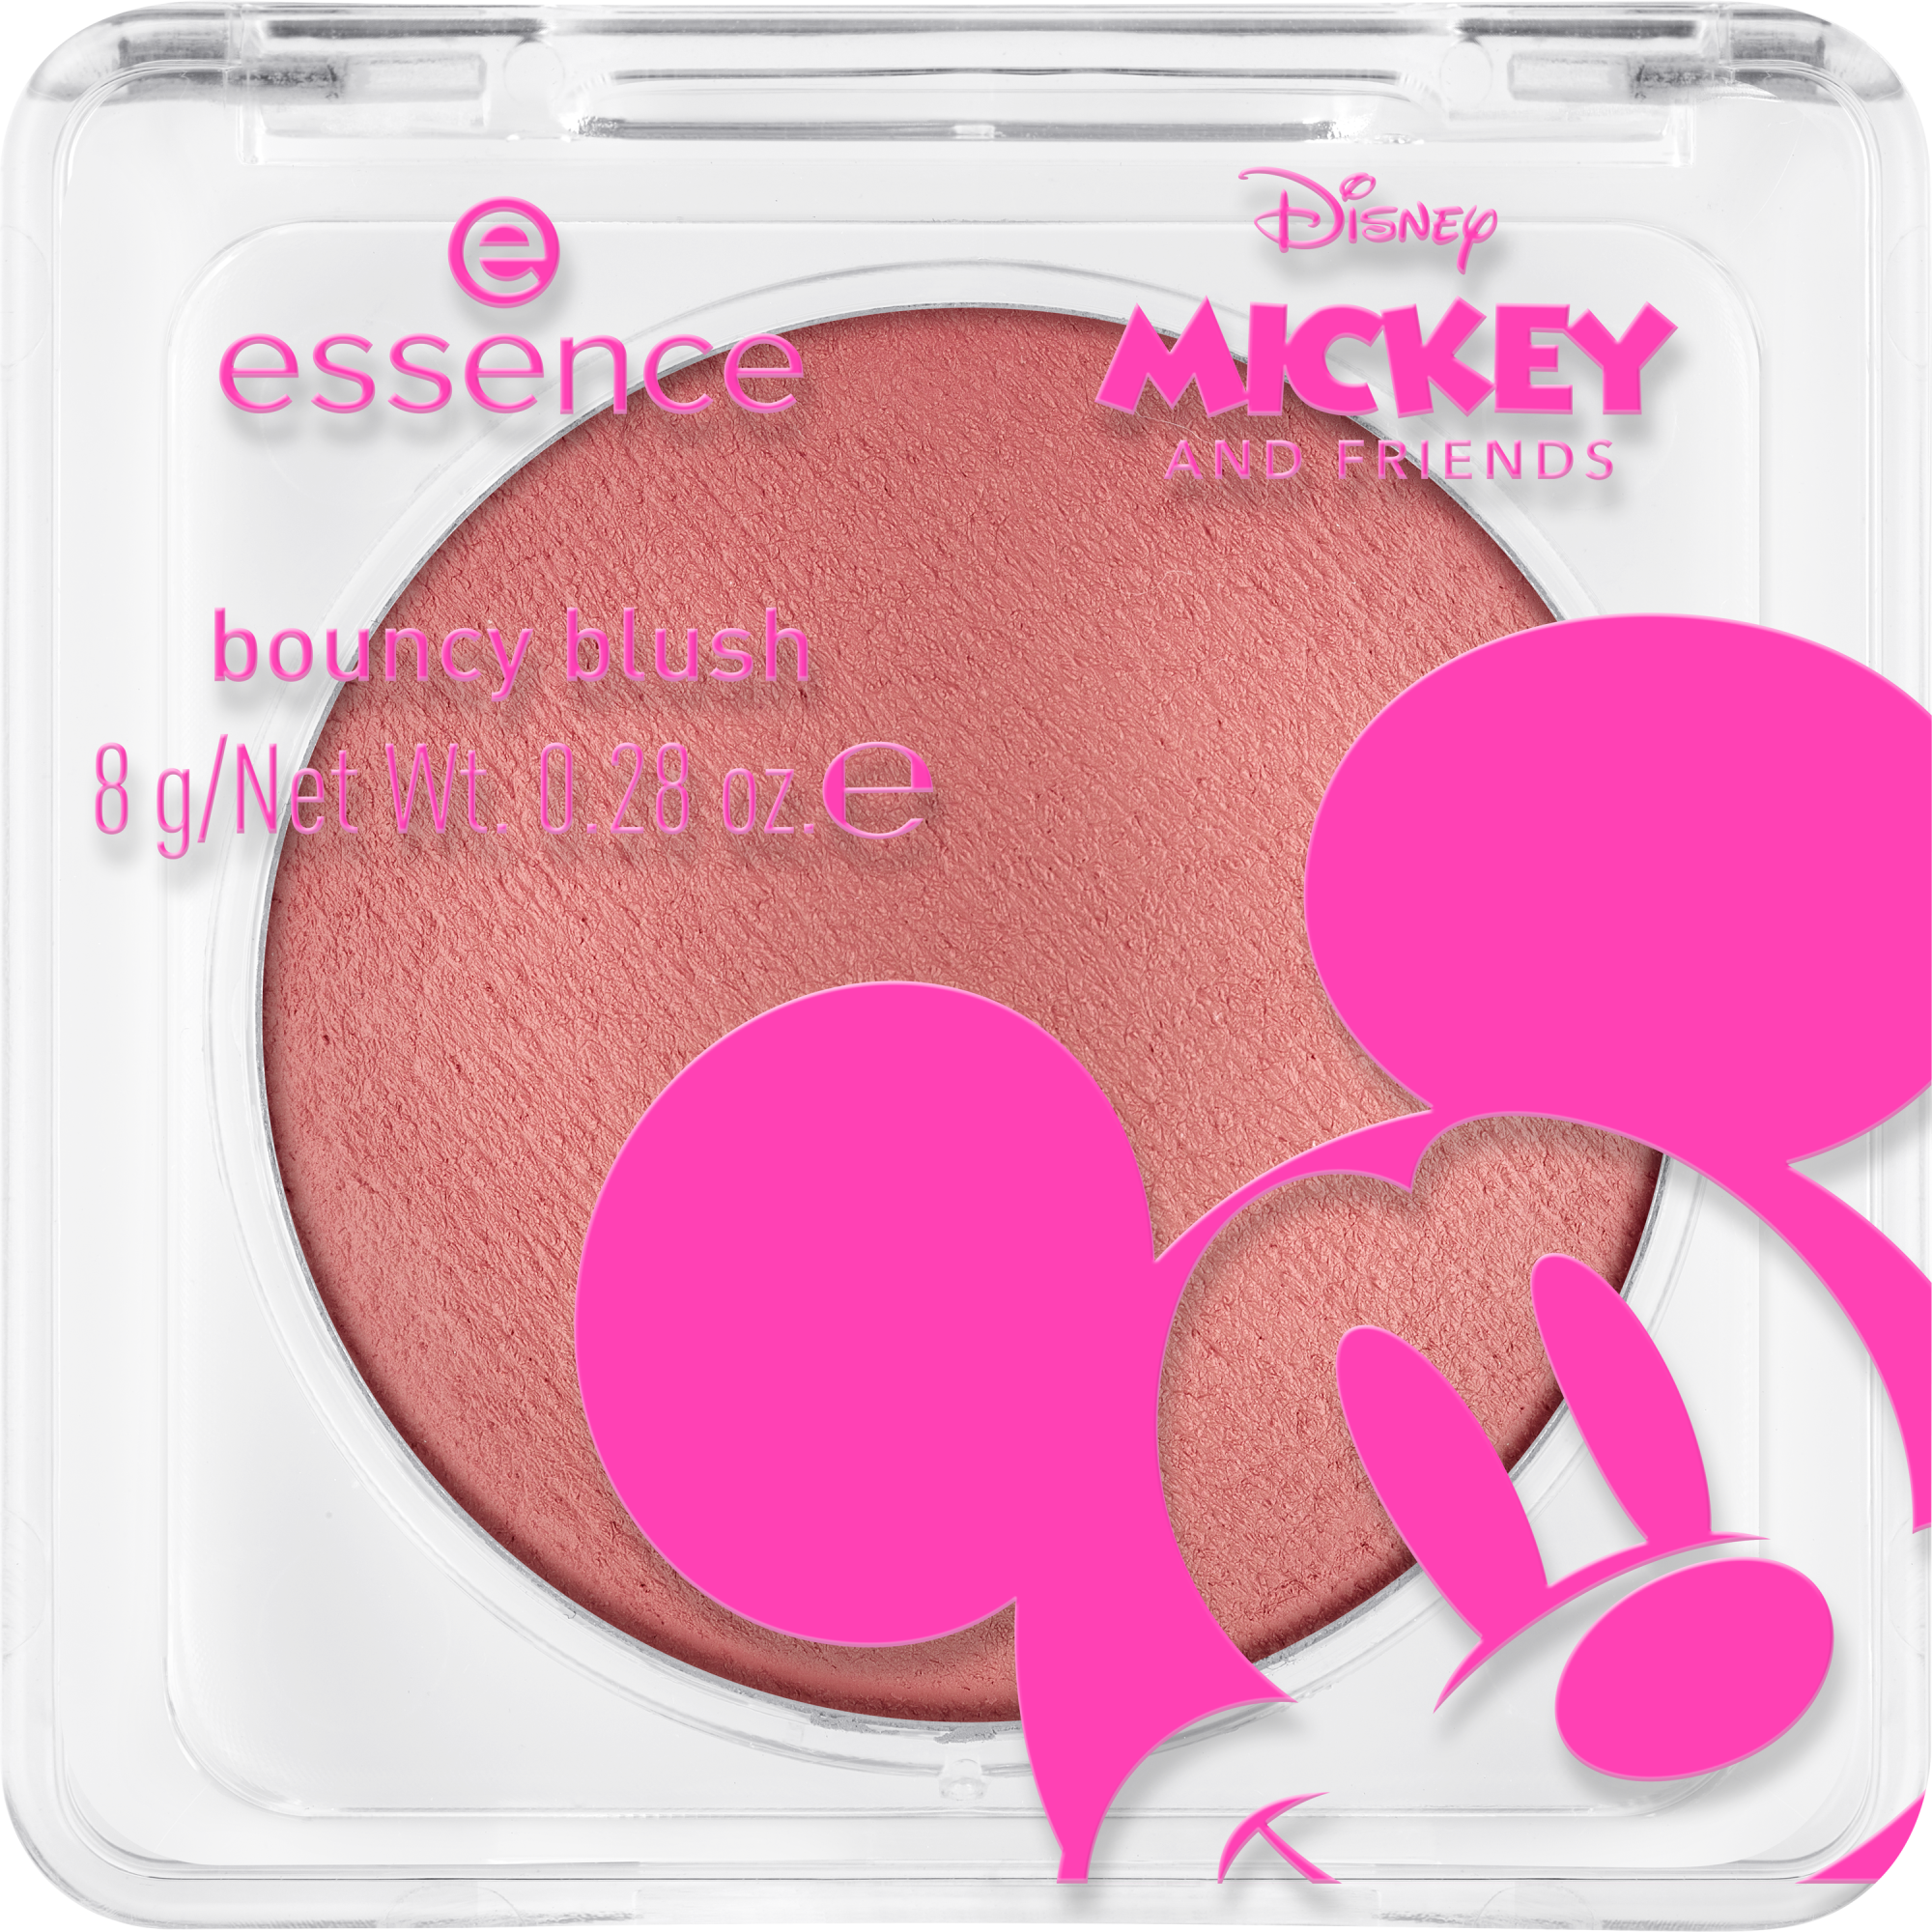 bouncy blush Disney Mickey and Friends